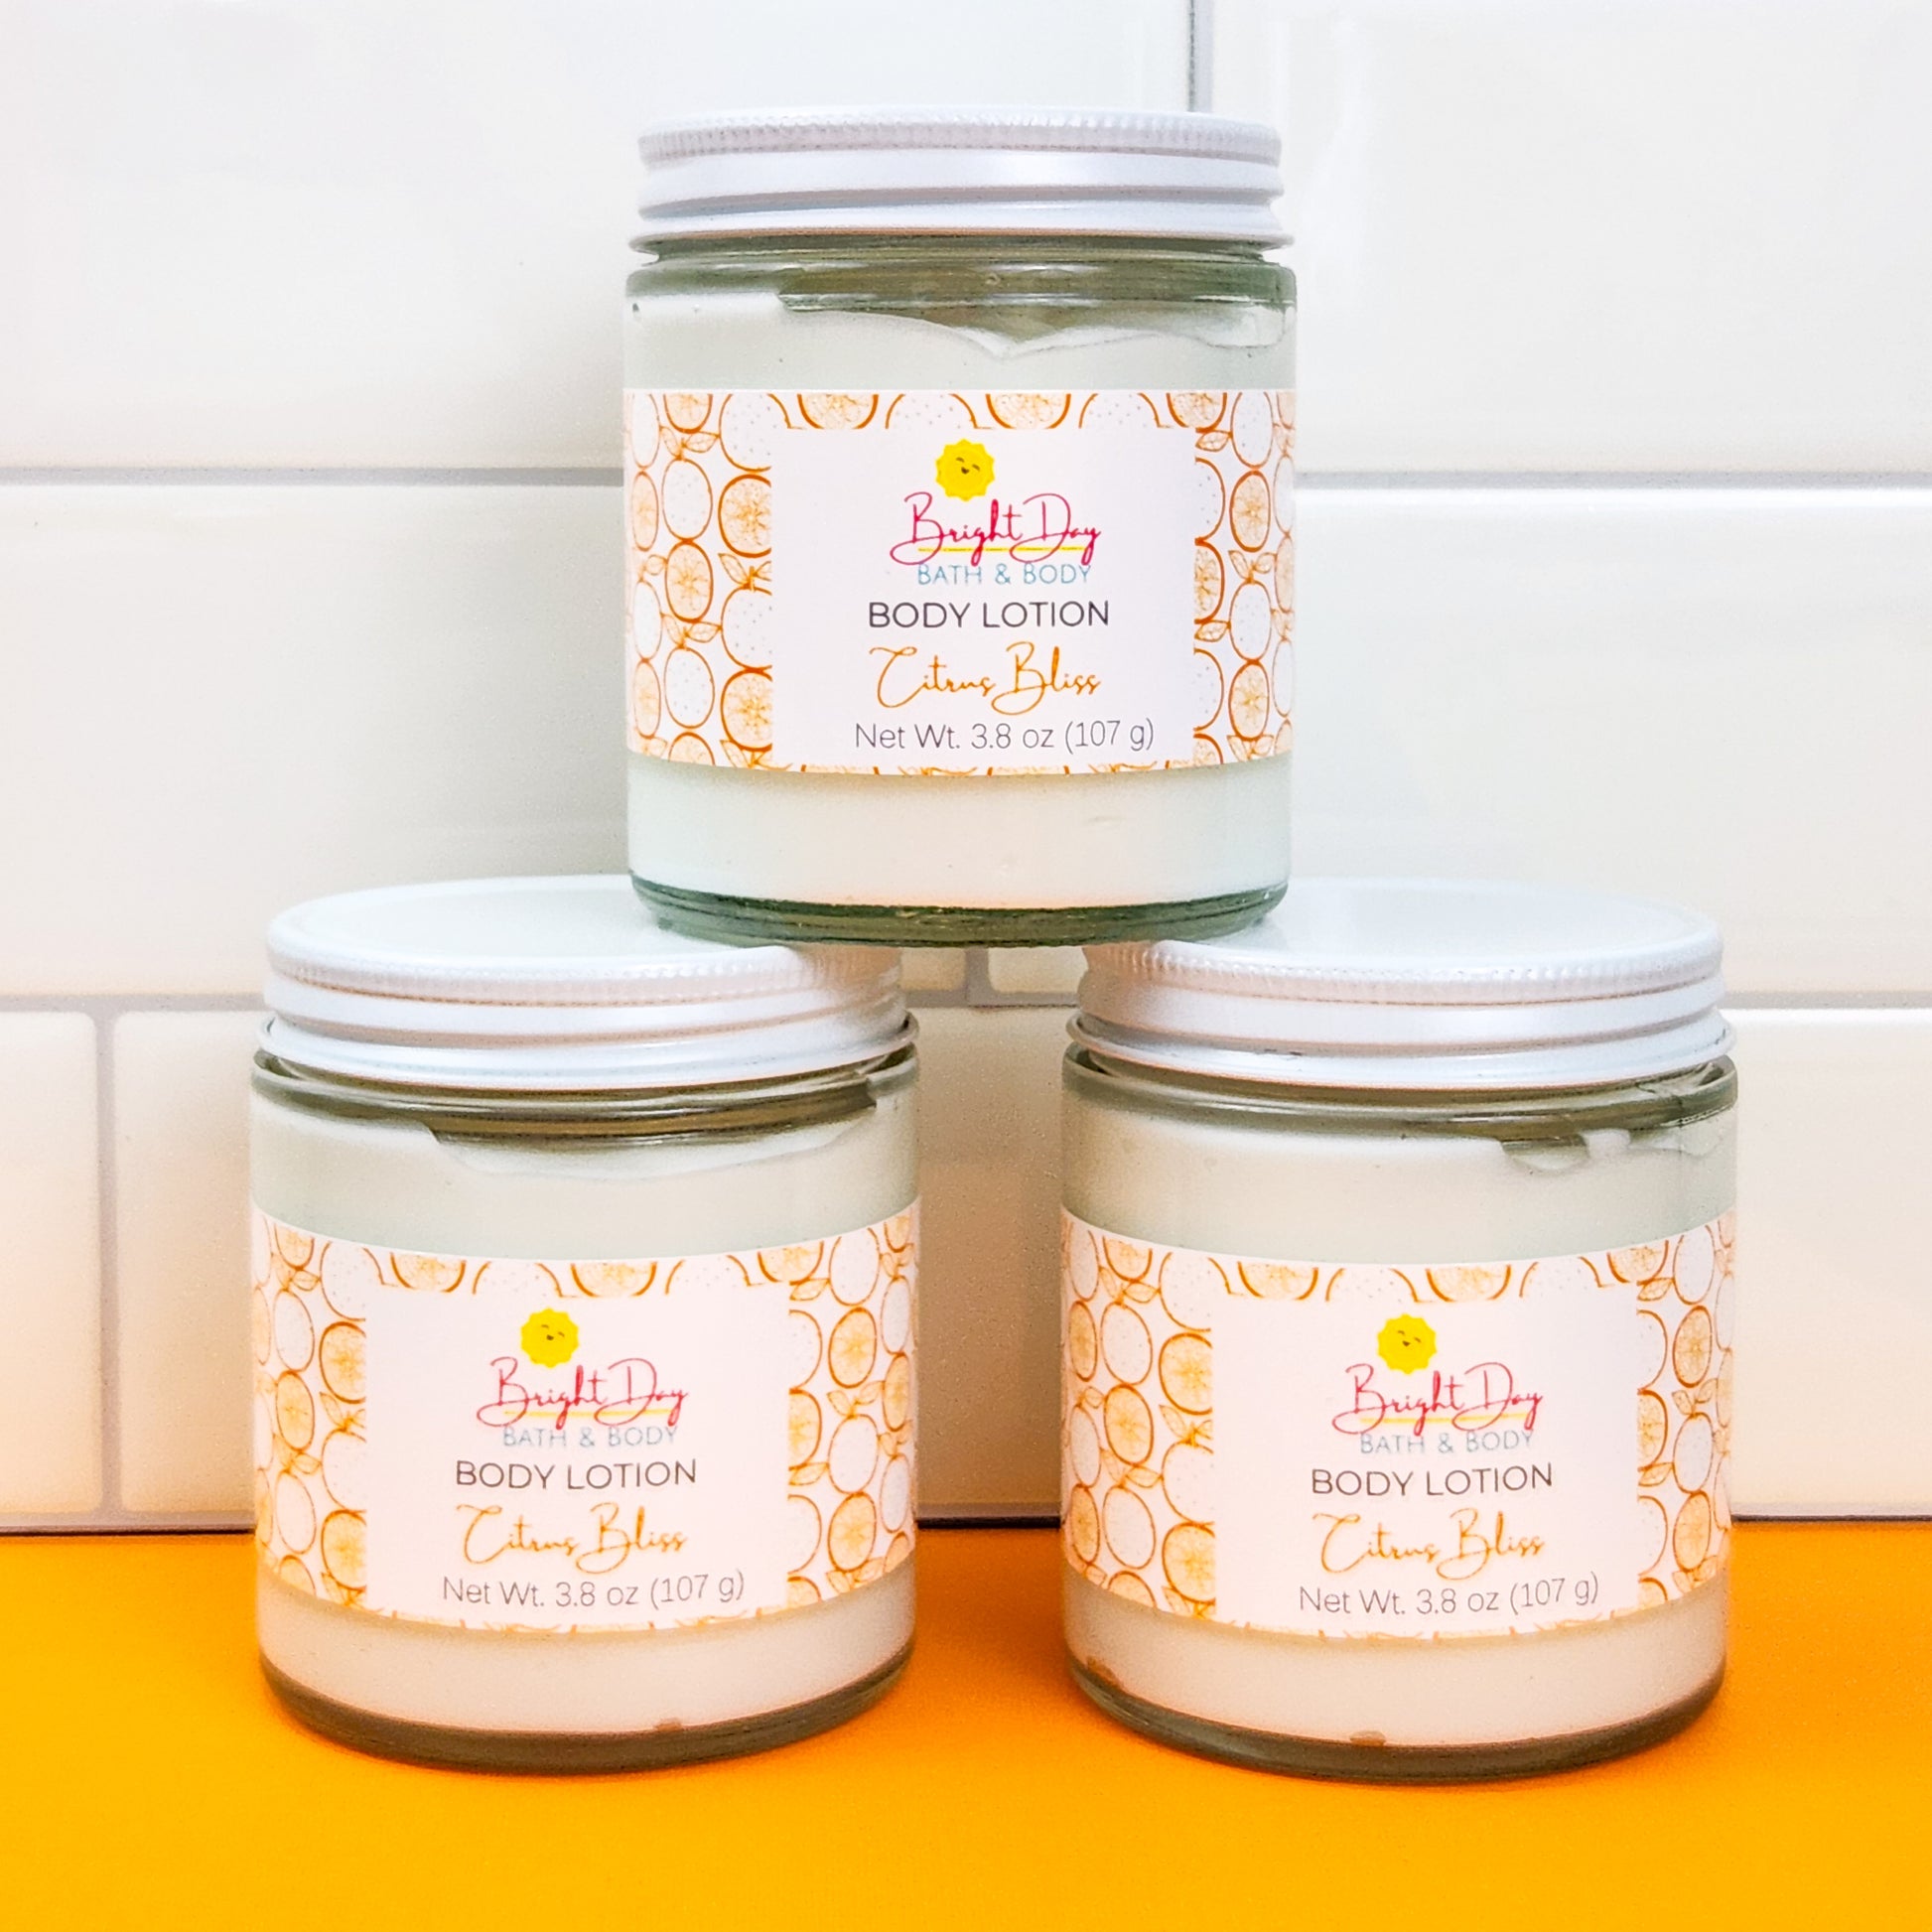 Three jars of Citrus Bliss Body Lotion stacked like a pyramid, on a white and orange background